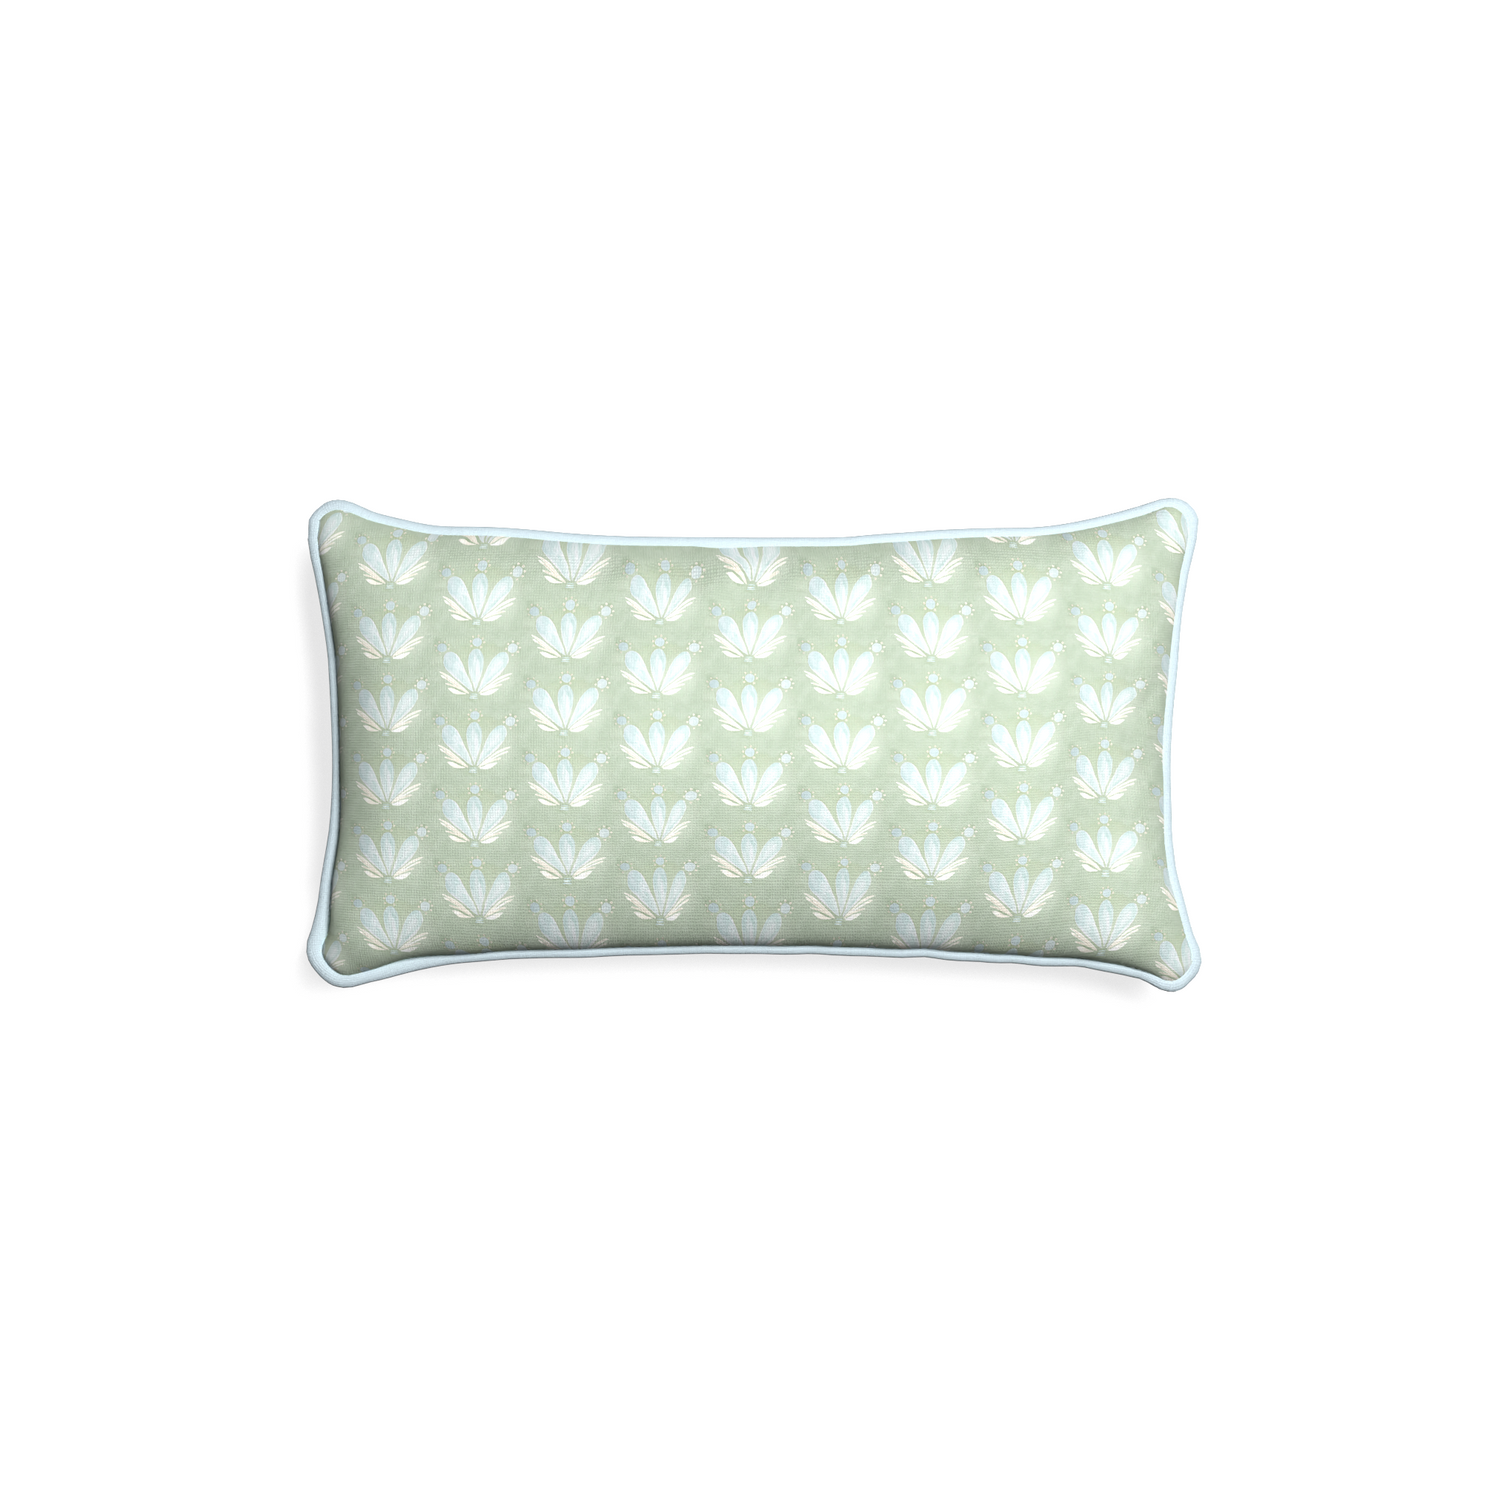 Petite-lumbar serena sea salt custom blue & green floral drop repeatpillow with powder piping on white background